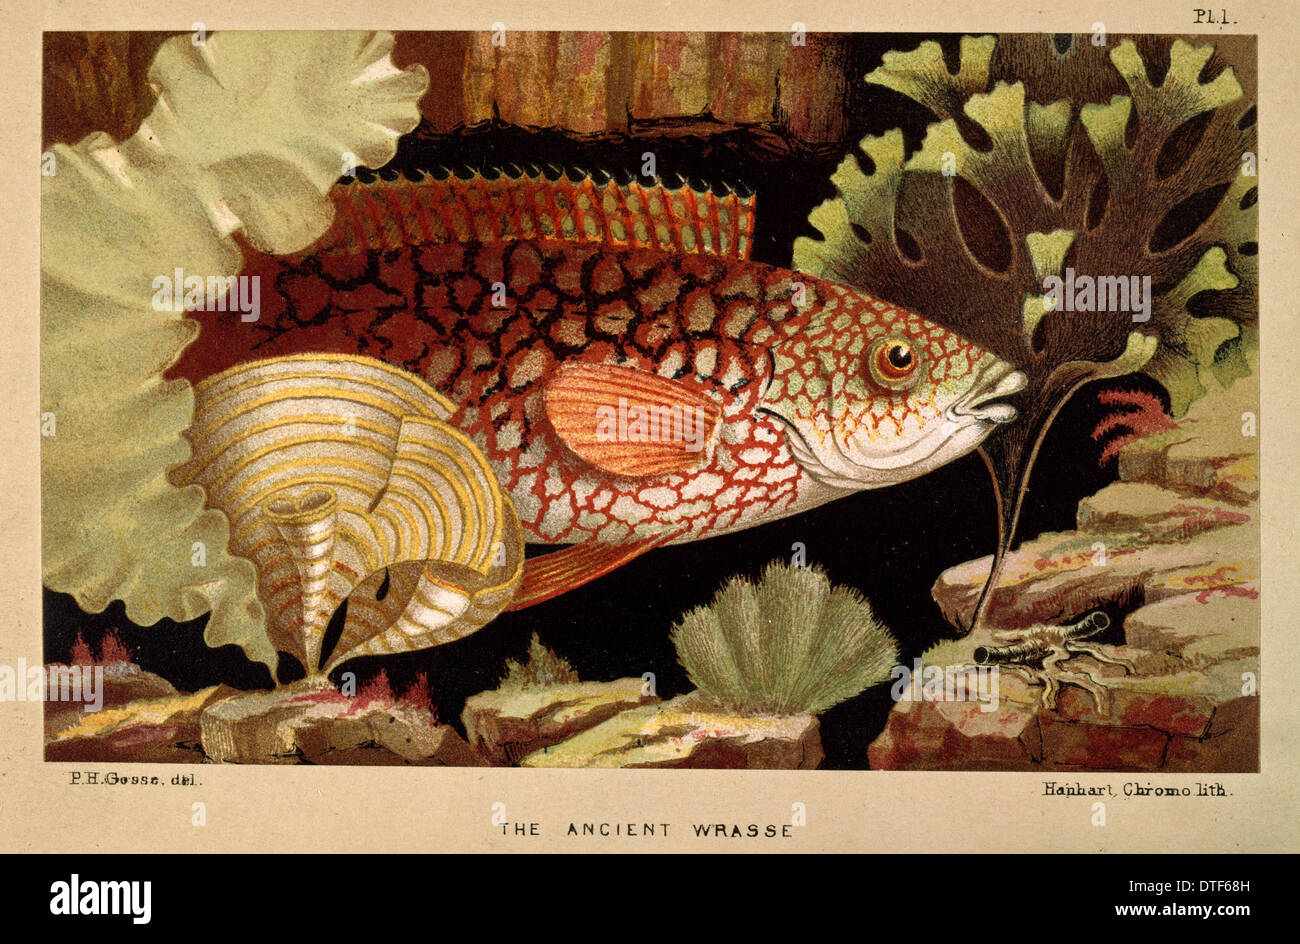 Ancient Wrasse - Frontispiece from the Aquarium Stock Photo